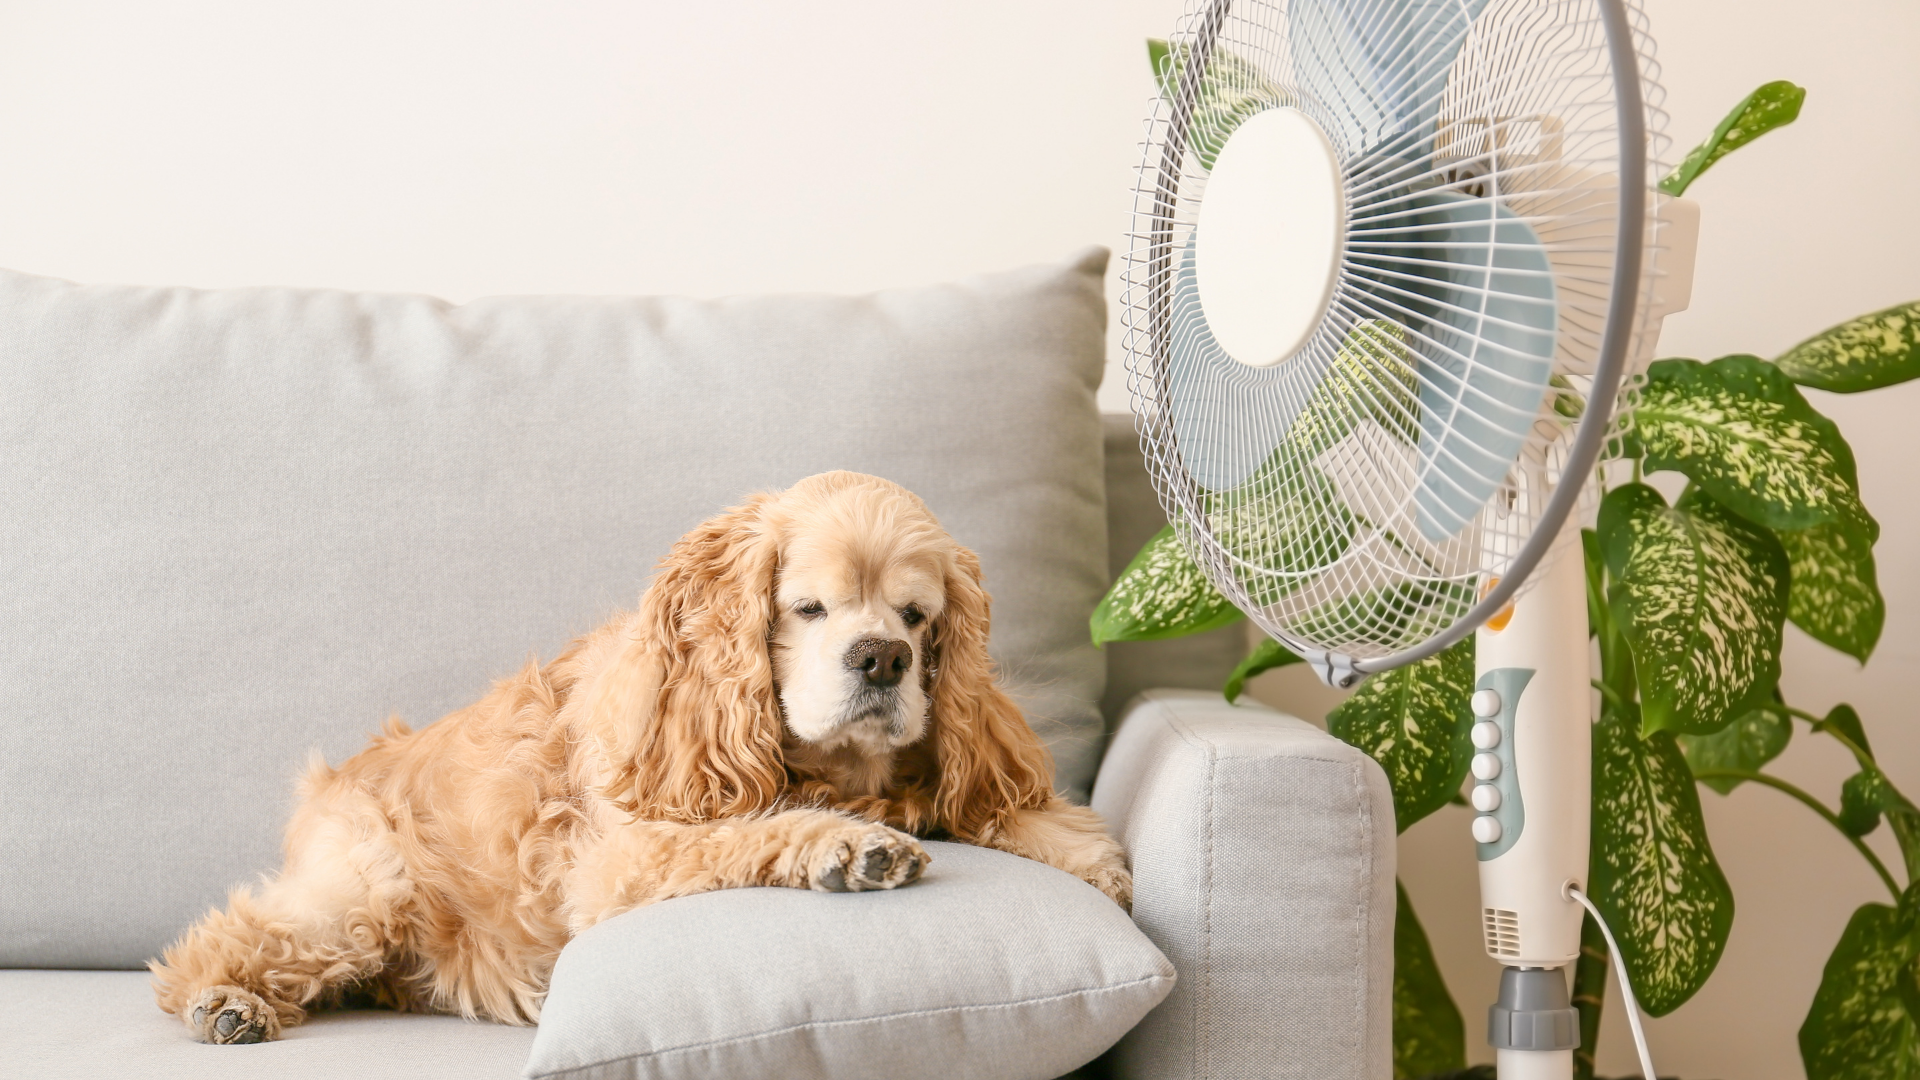 Cute dog on couch with standing electric fan